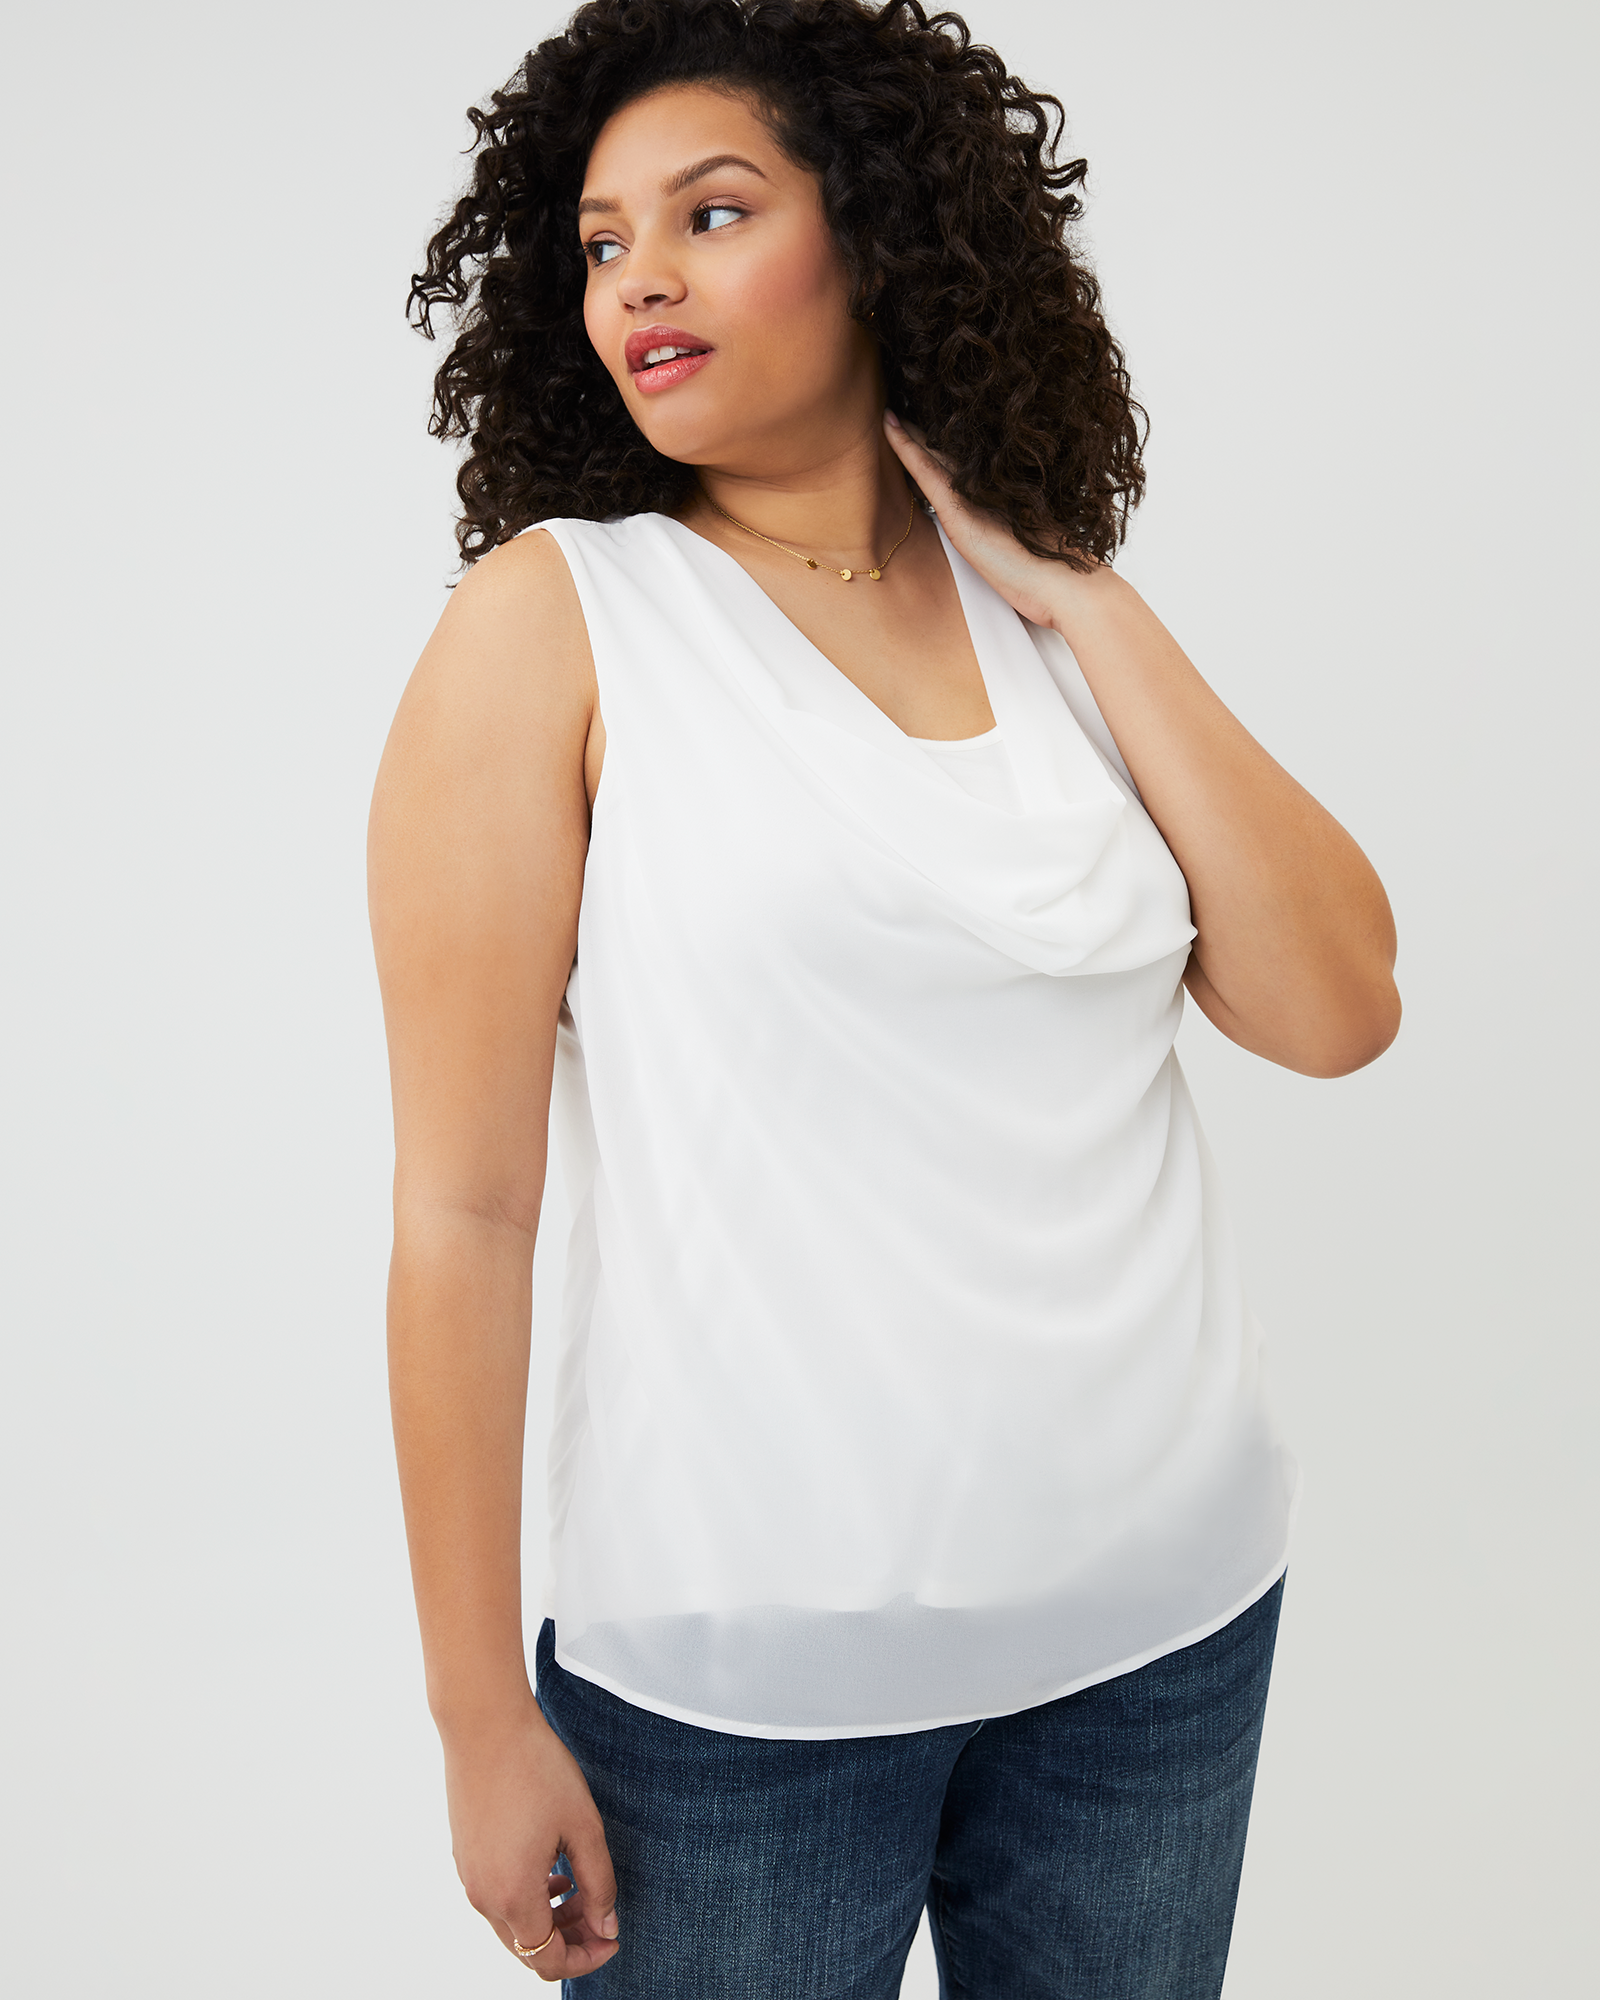 Plus Size Blouses For Special Occasions